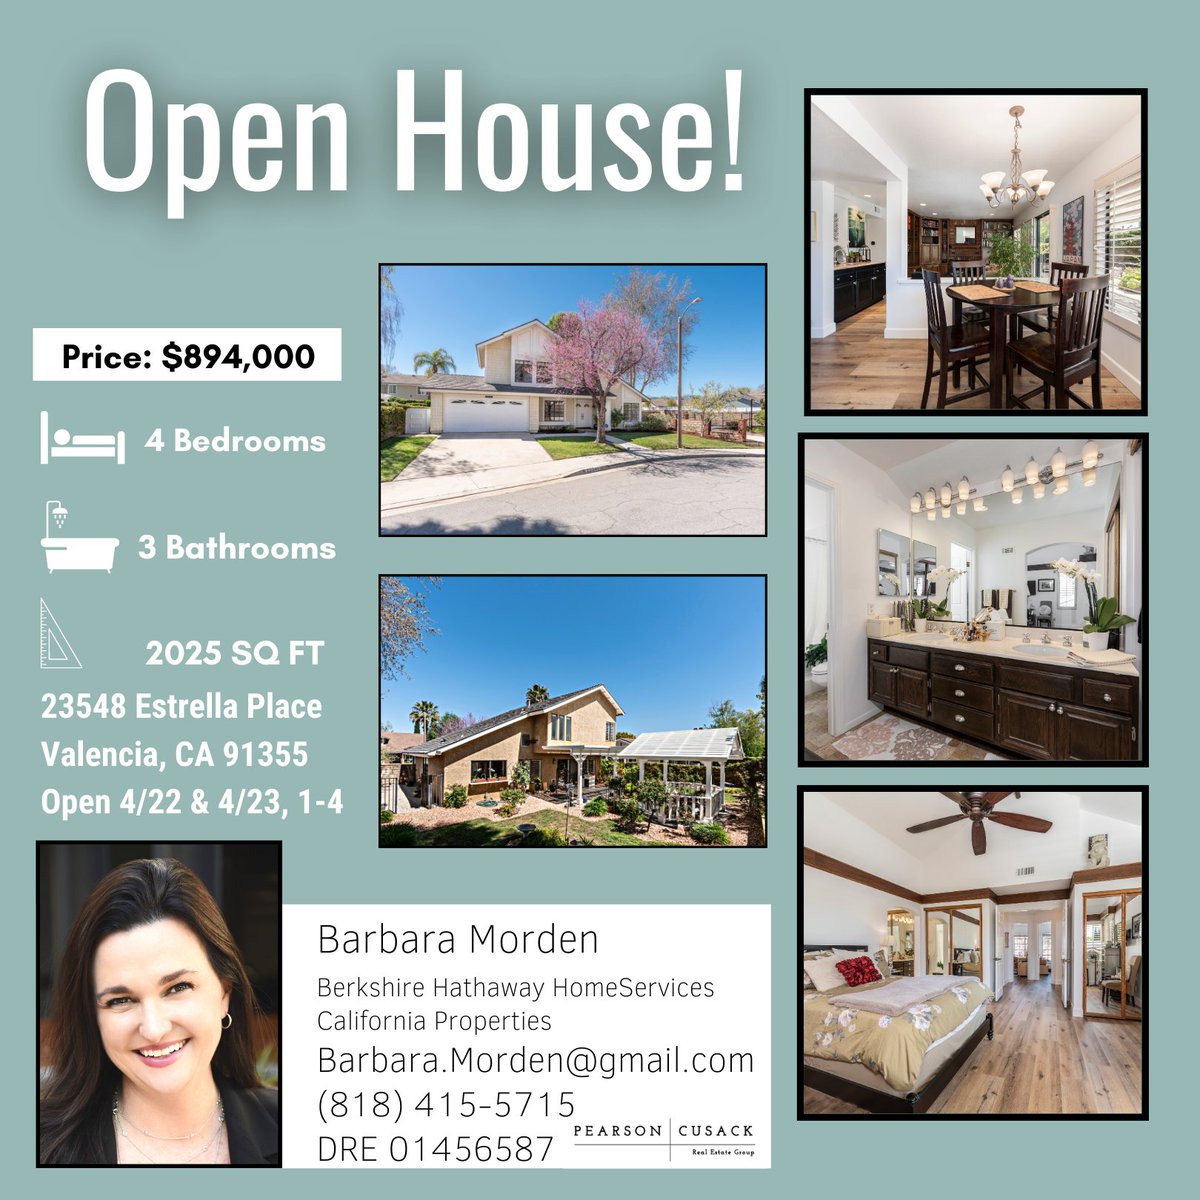 New listing alert! ⚡️
4 Bed + 3 Bath | 2025 Sqft

Amazing cul-de-sac location in coveted Granary Square South neighborhood.

 #OpenHouse #JustListed #ValenciaRealEstate 

Barbara Morden DRE 01456587
Jamie Pearson DRE 00817566
Berkshire Hathaway HomeServices California
Properties